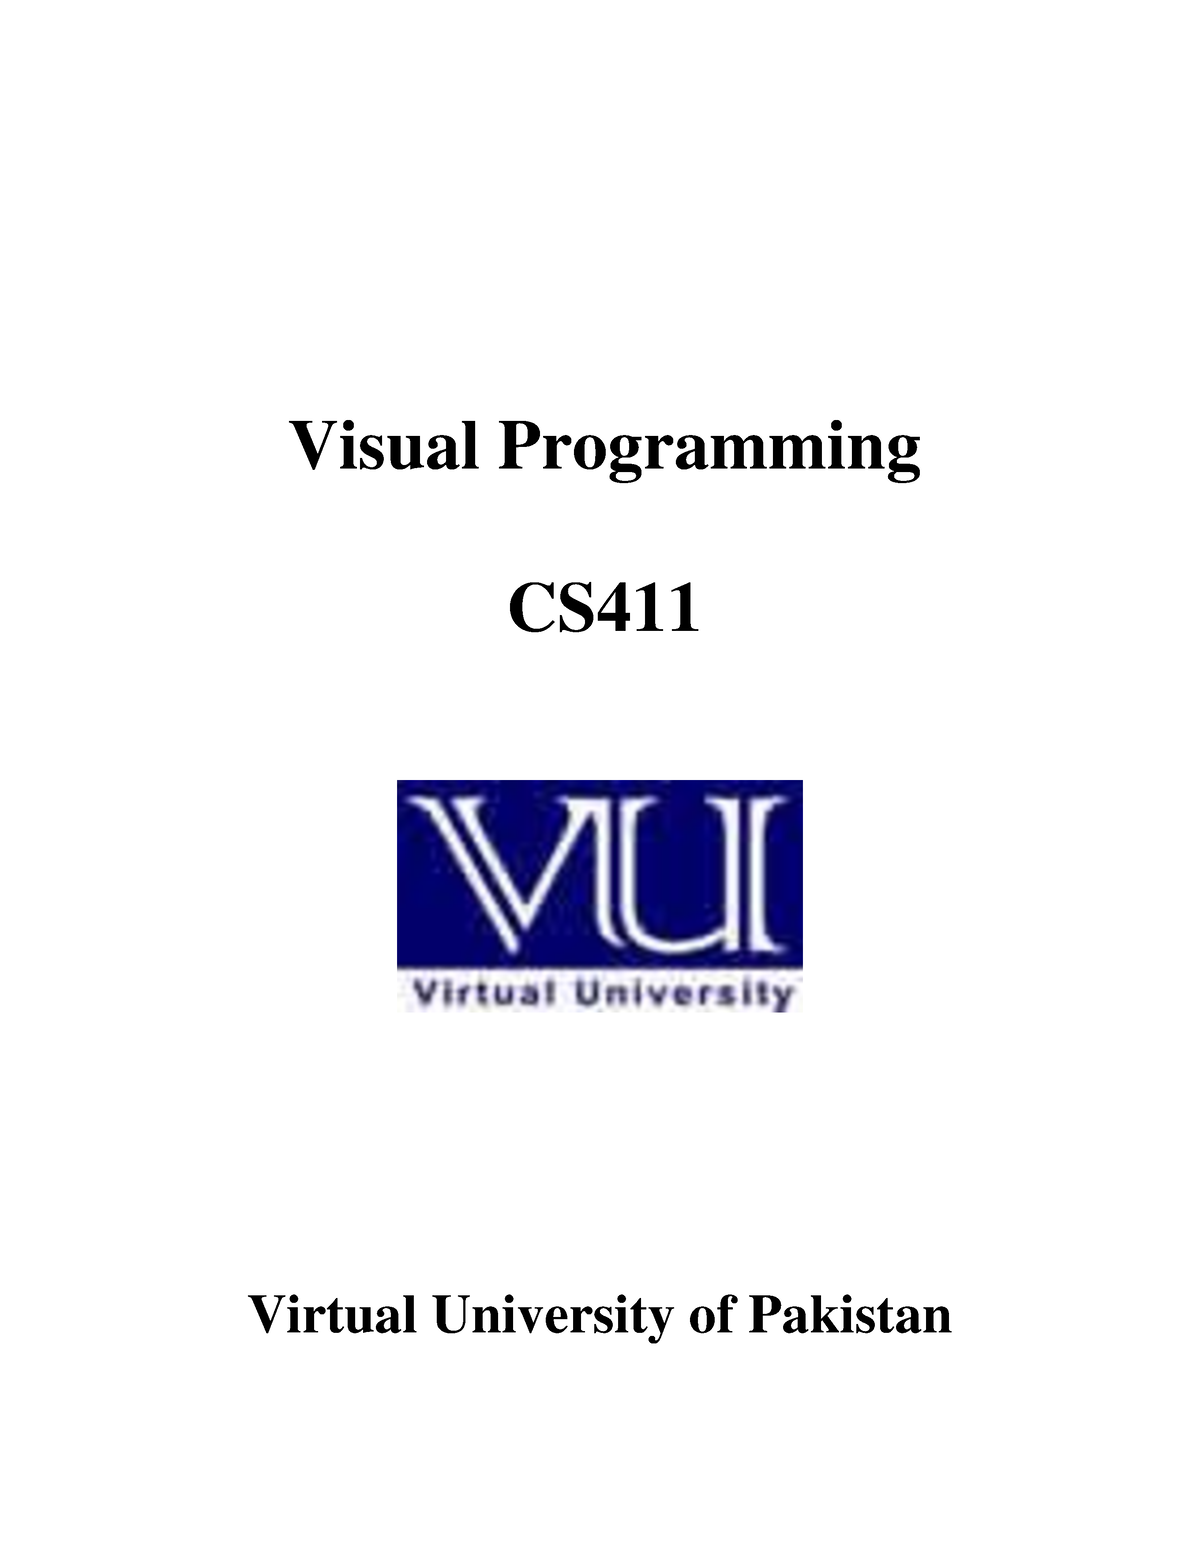 CS411 short lectures vu Lecture # 02, Visual Programming, Learning